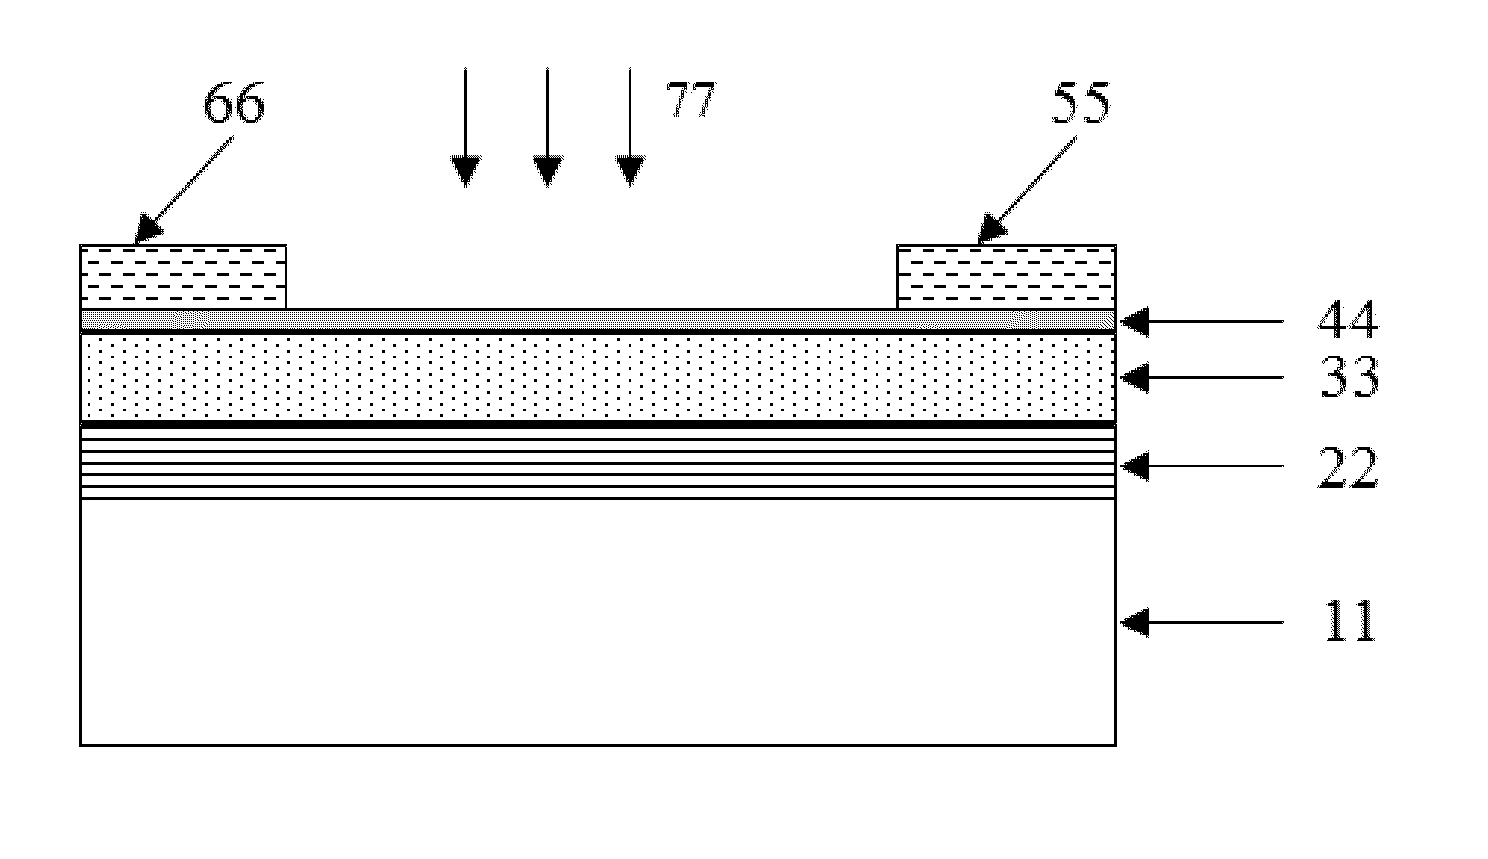 Graphene transistor optical detector based on metamaterial structure and application thereof